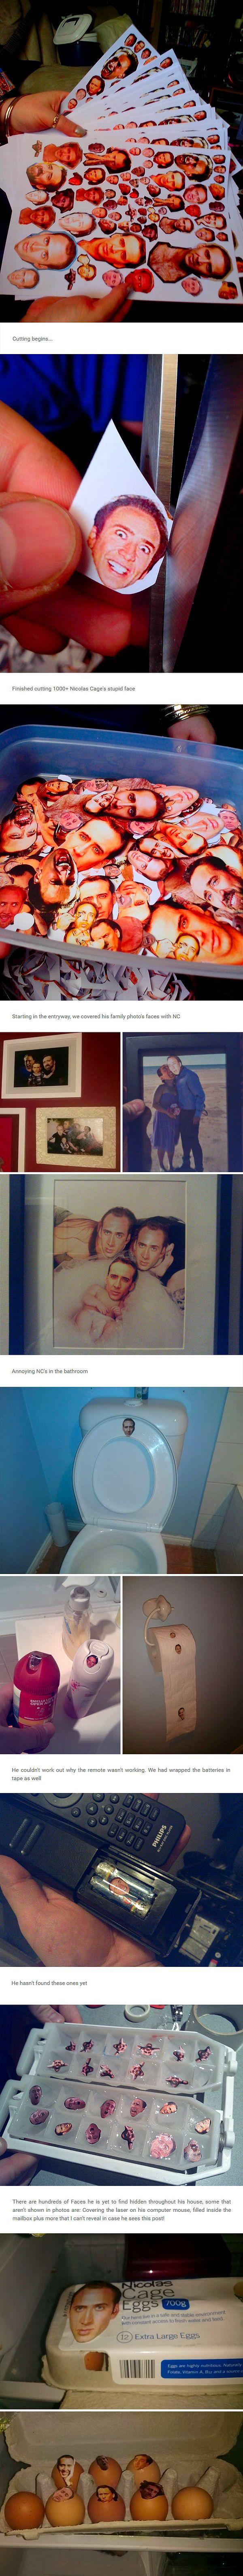 18. So My Brother Thinks Nicolas Cage Is A Big D-Bag. We Have A History Of Pranking Each Other In Ridiculous Ways, So My Gf And I Came Up With The Idea